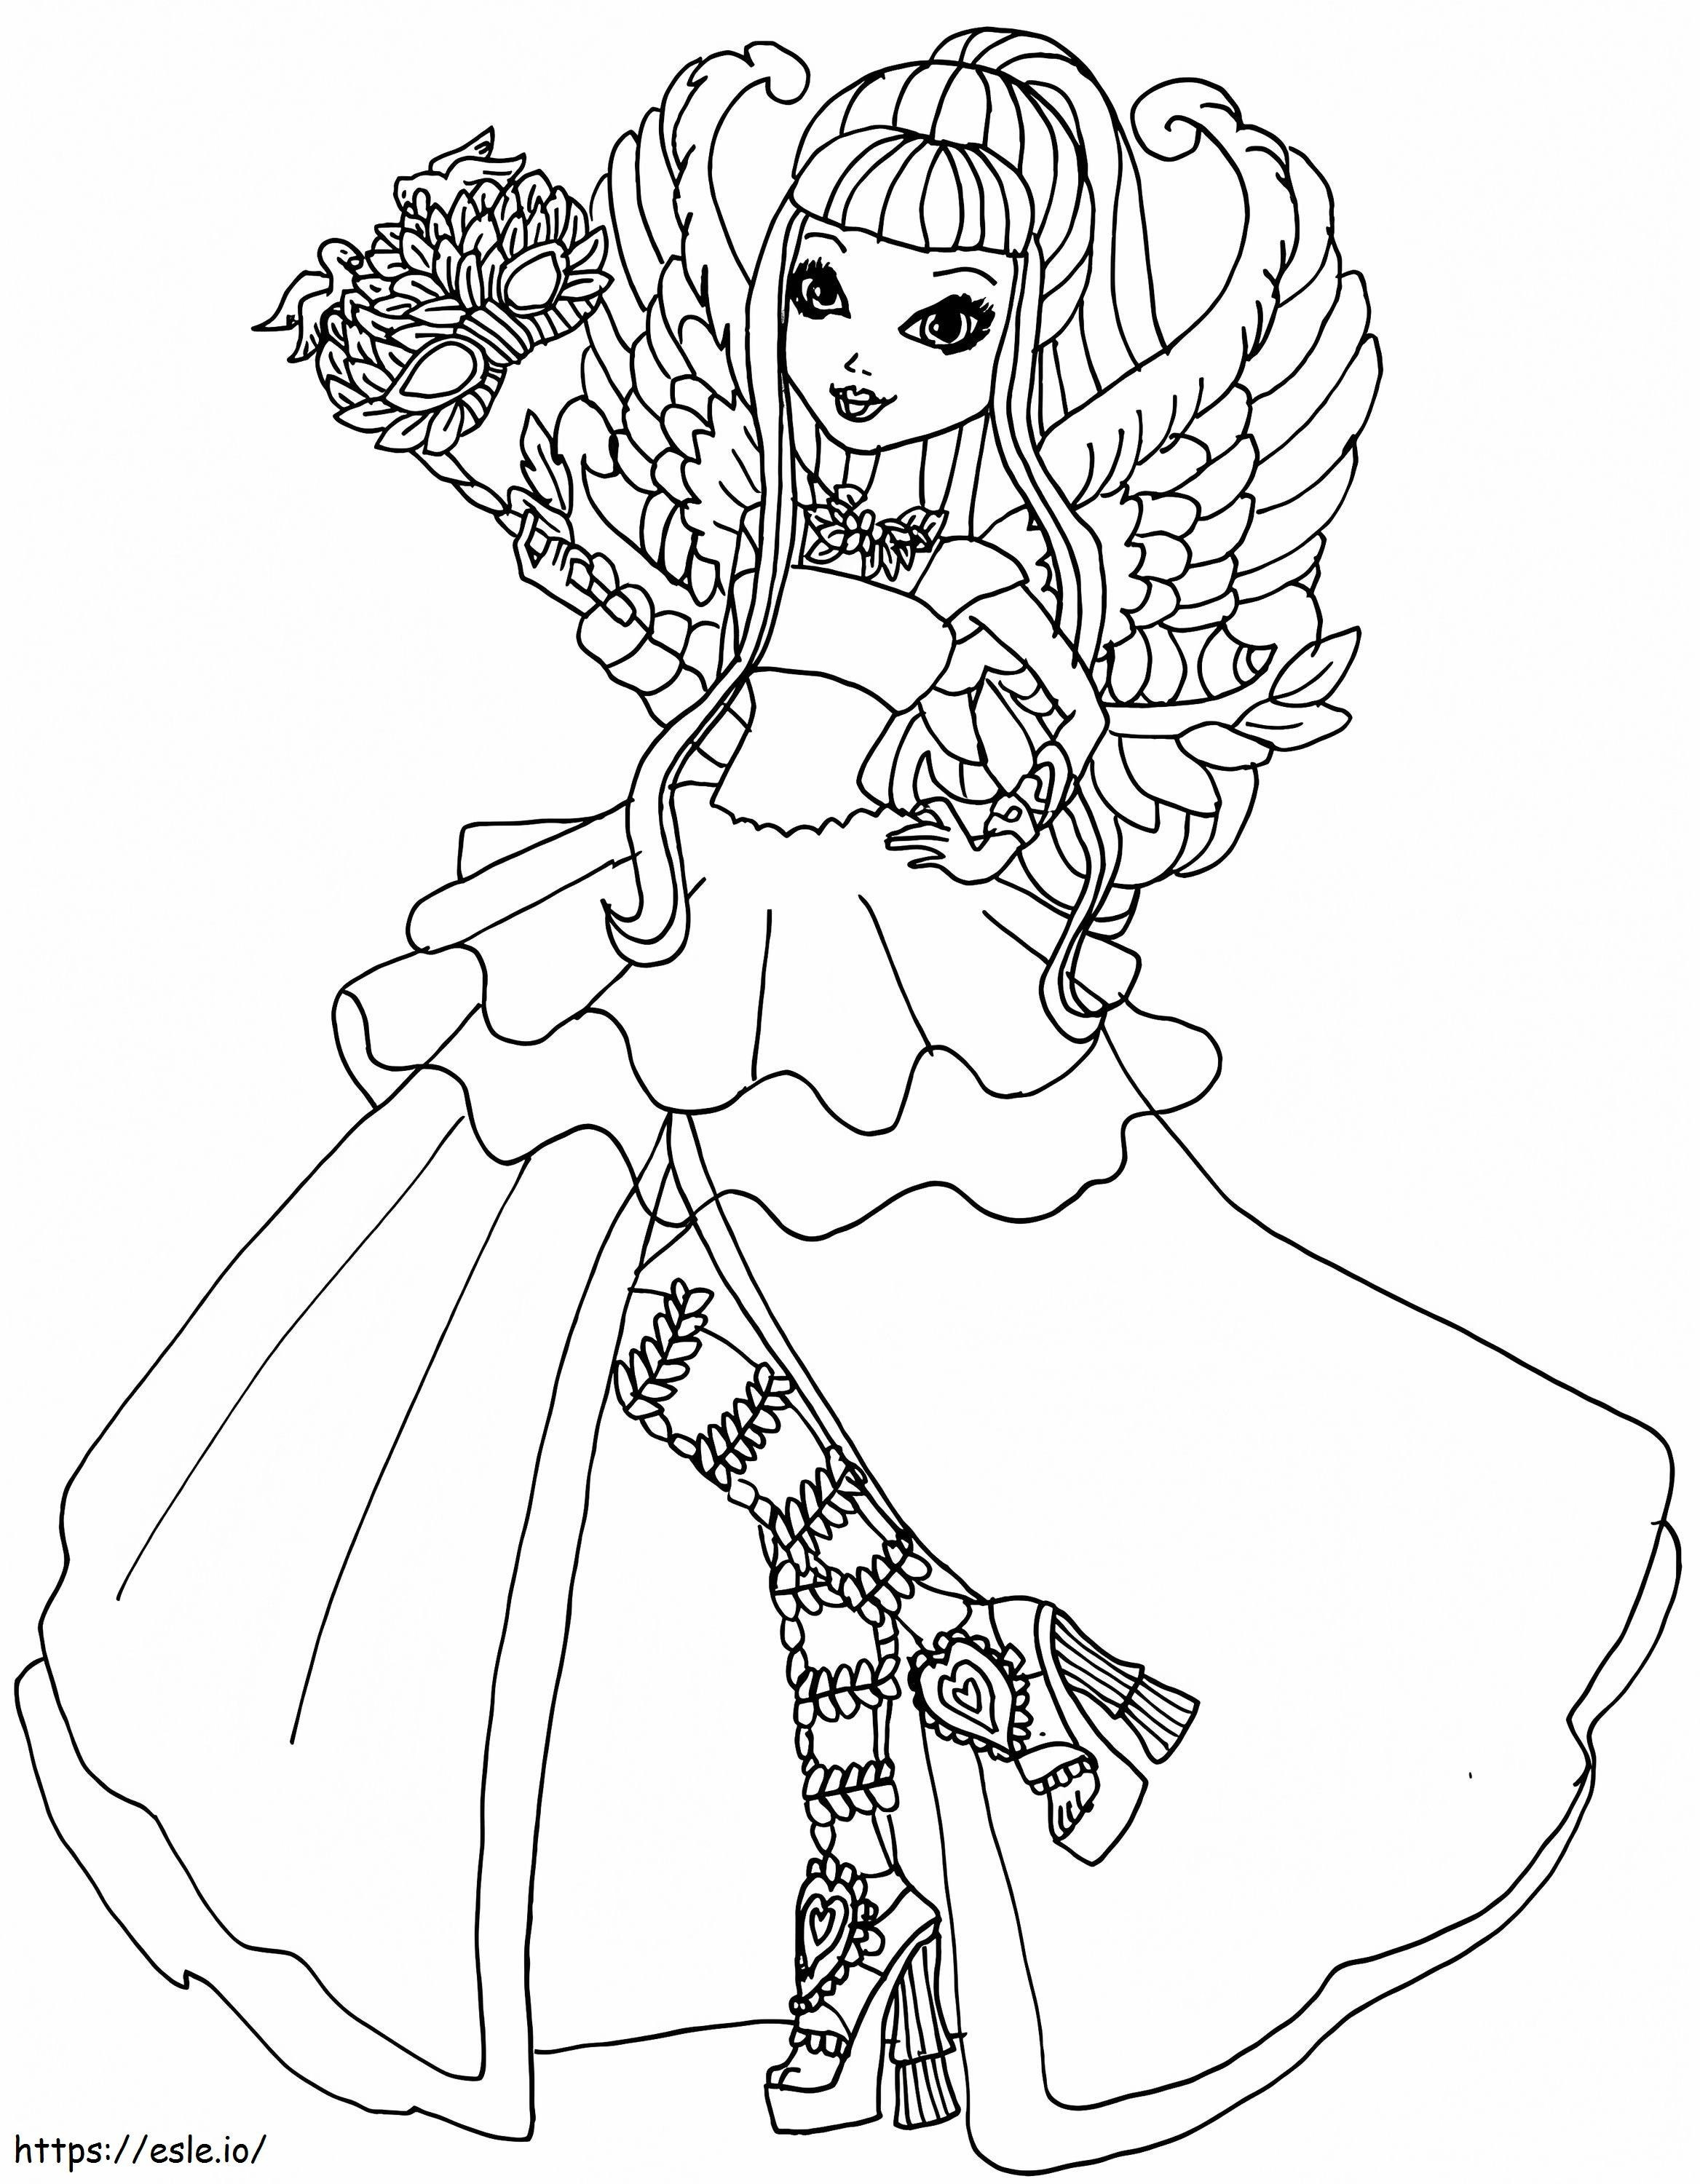 Ds84Gd51Gs coloring page